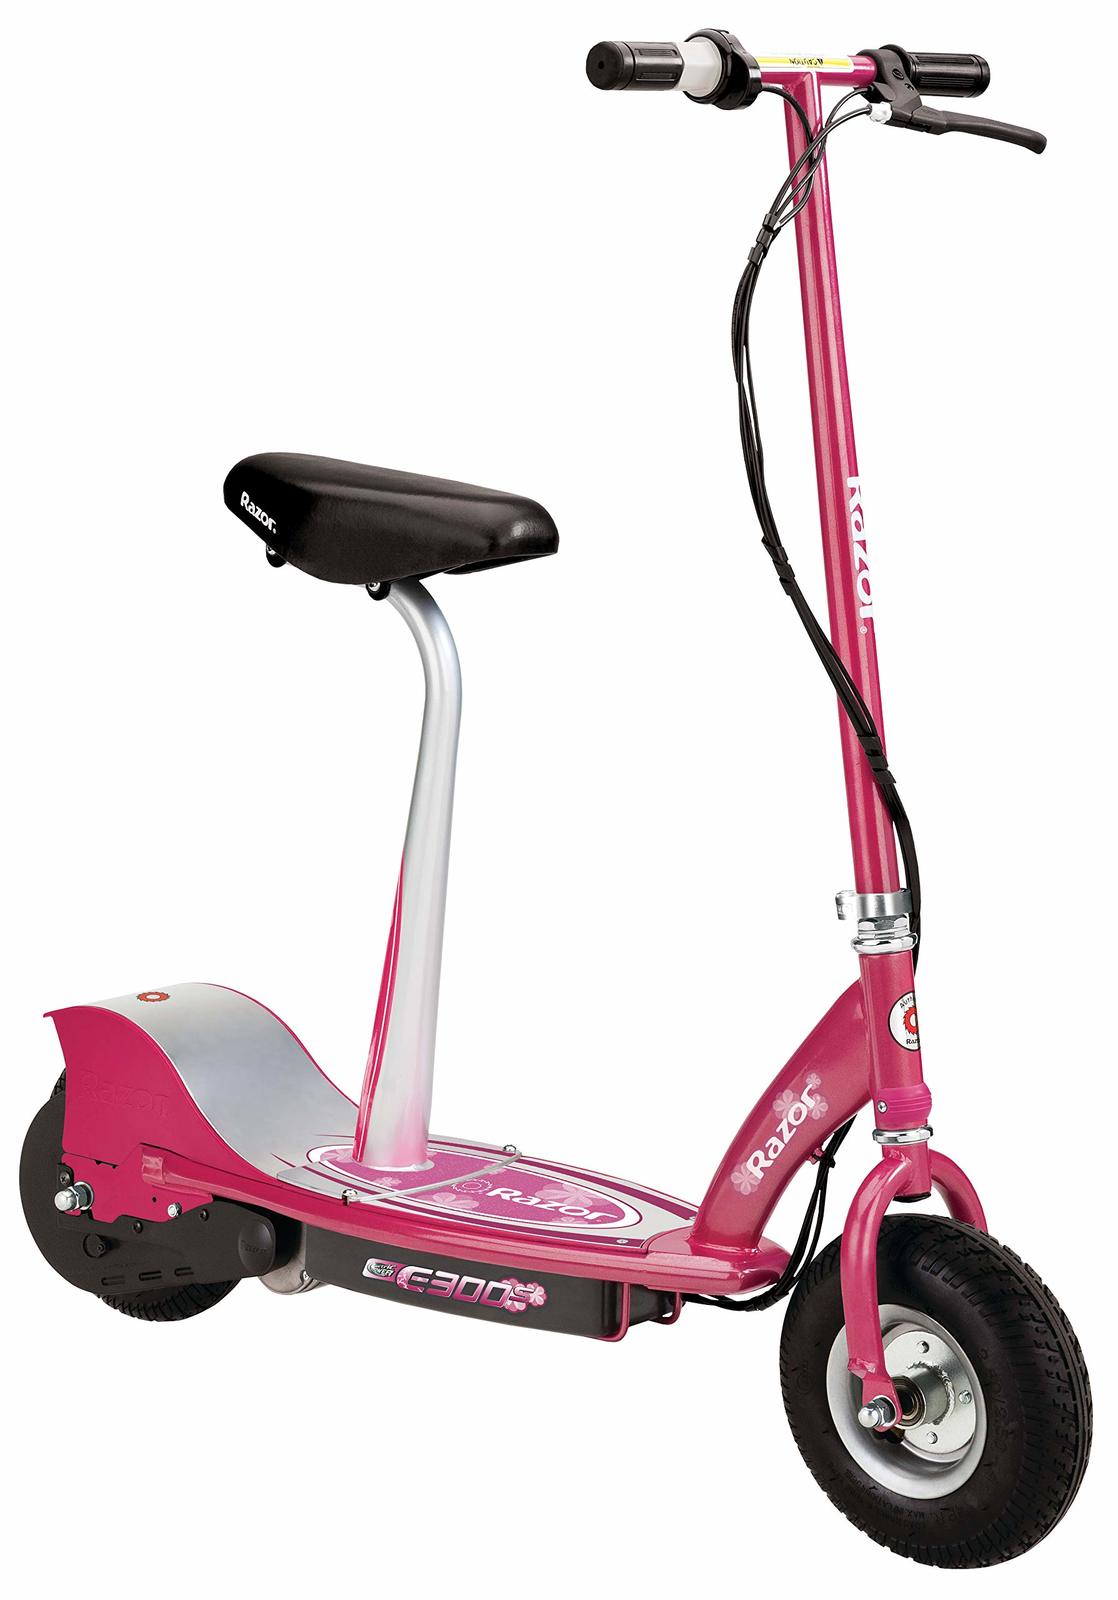 Razor E300S Seated Electric Scooter - Sweet Pea, Pink - $444.44